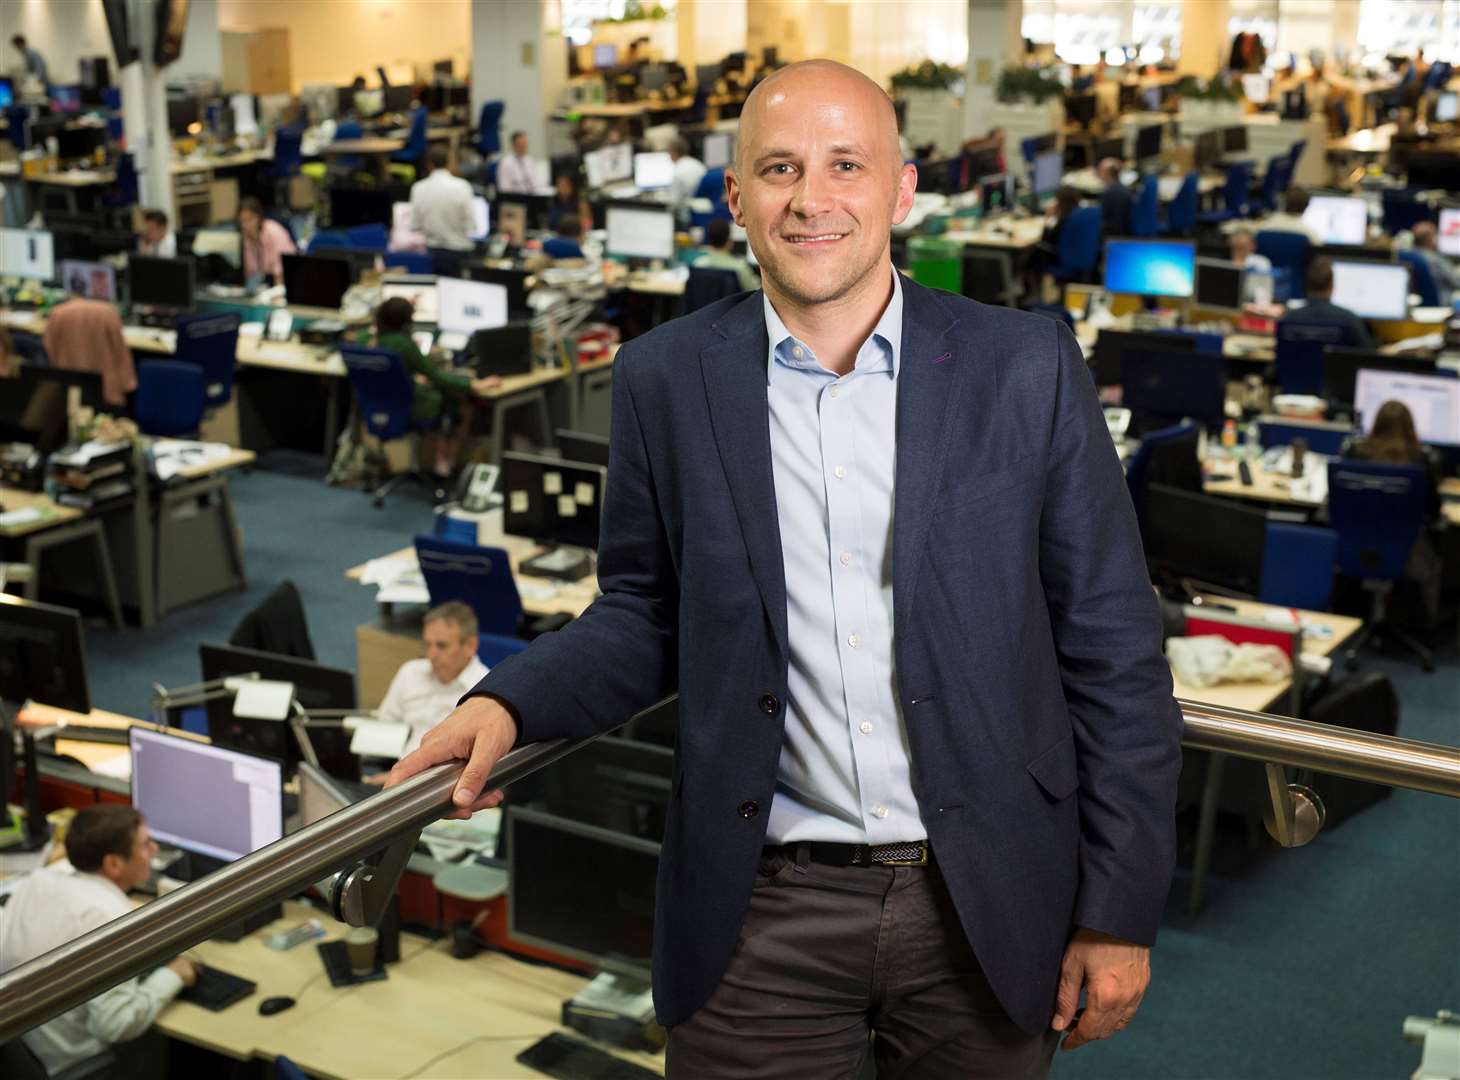 Nick Hugh stepped down as chief executive of the Telegraph Media Group on Friday (Telegraph Media Group/PA)